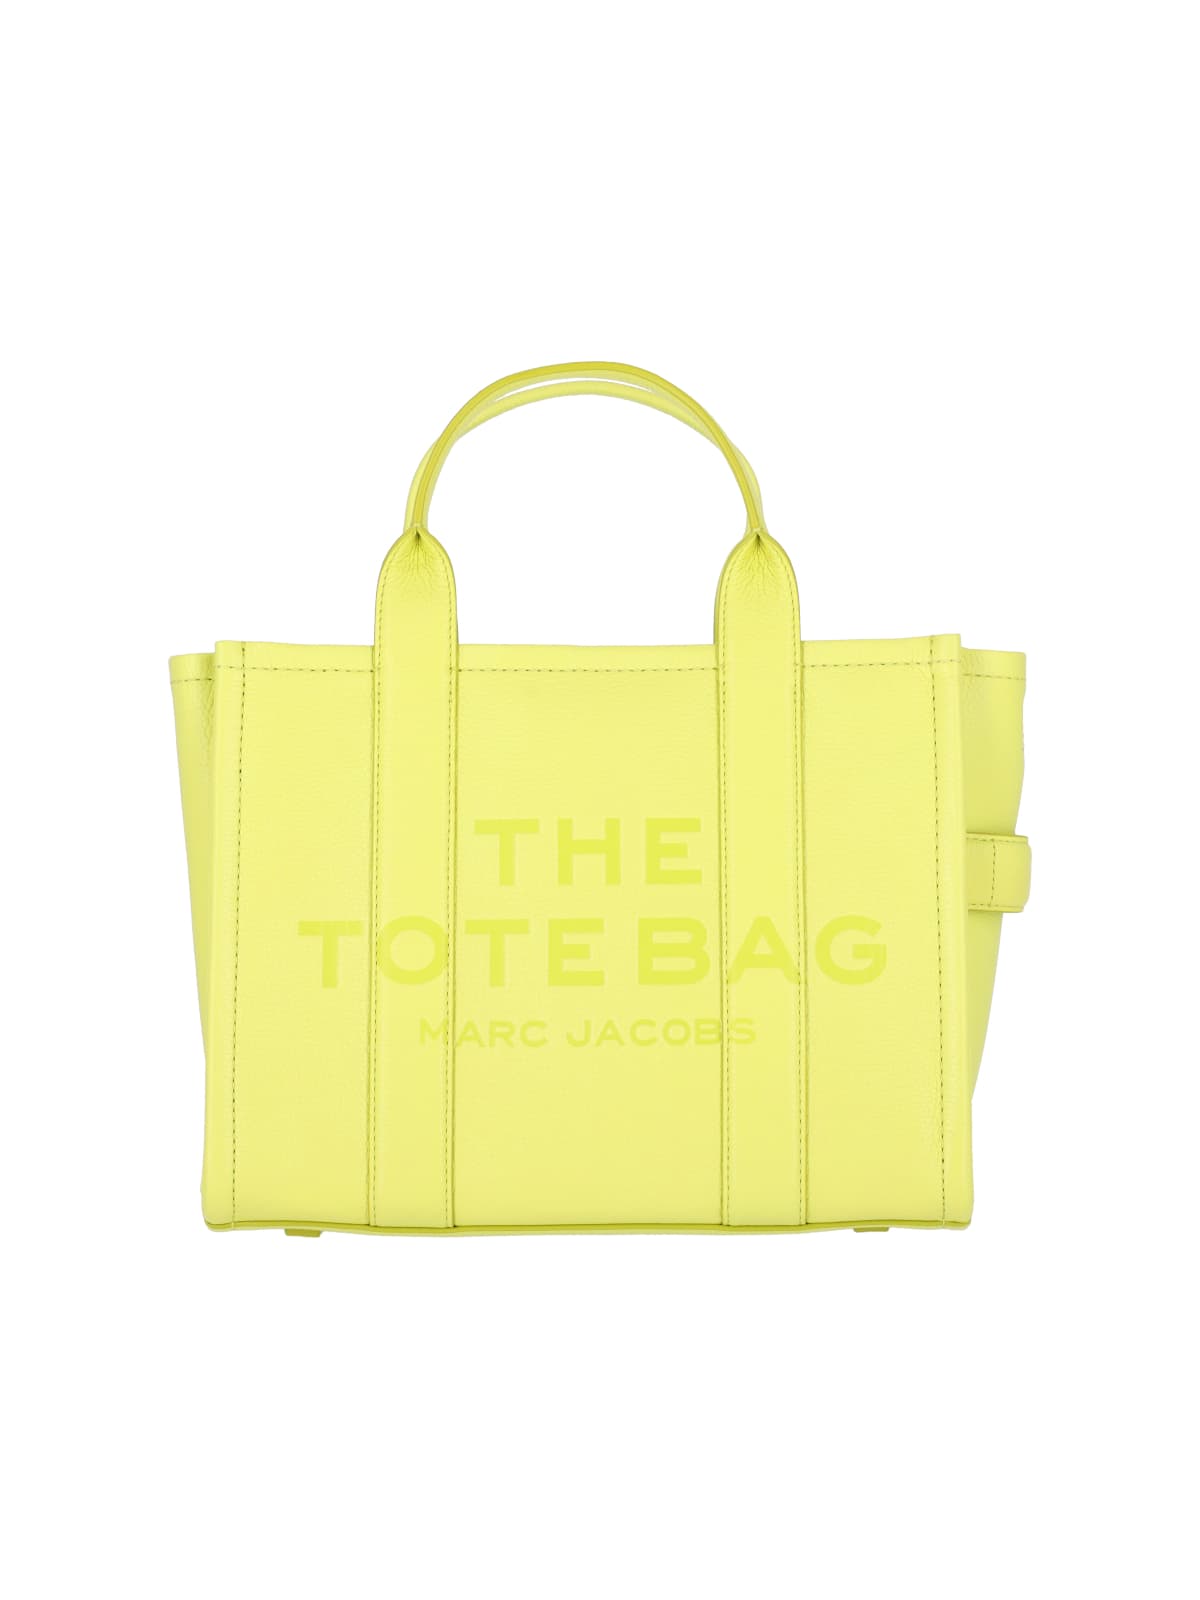 Marc Jacobs The Medium Tote Bag In Yellow